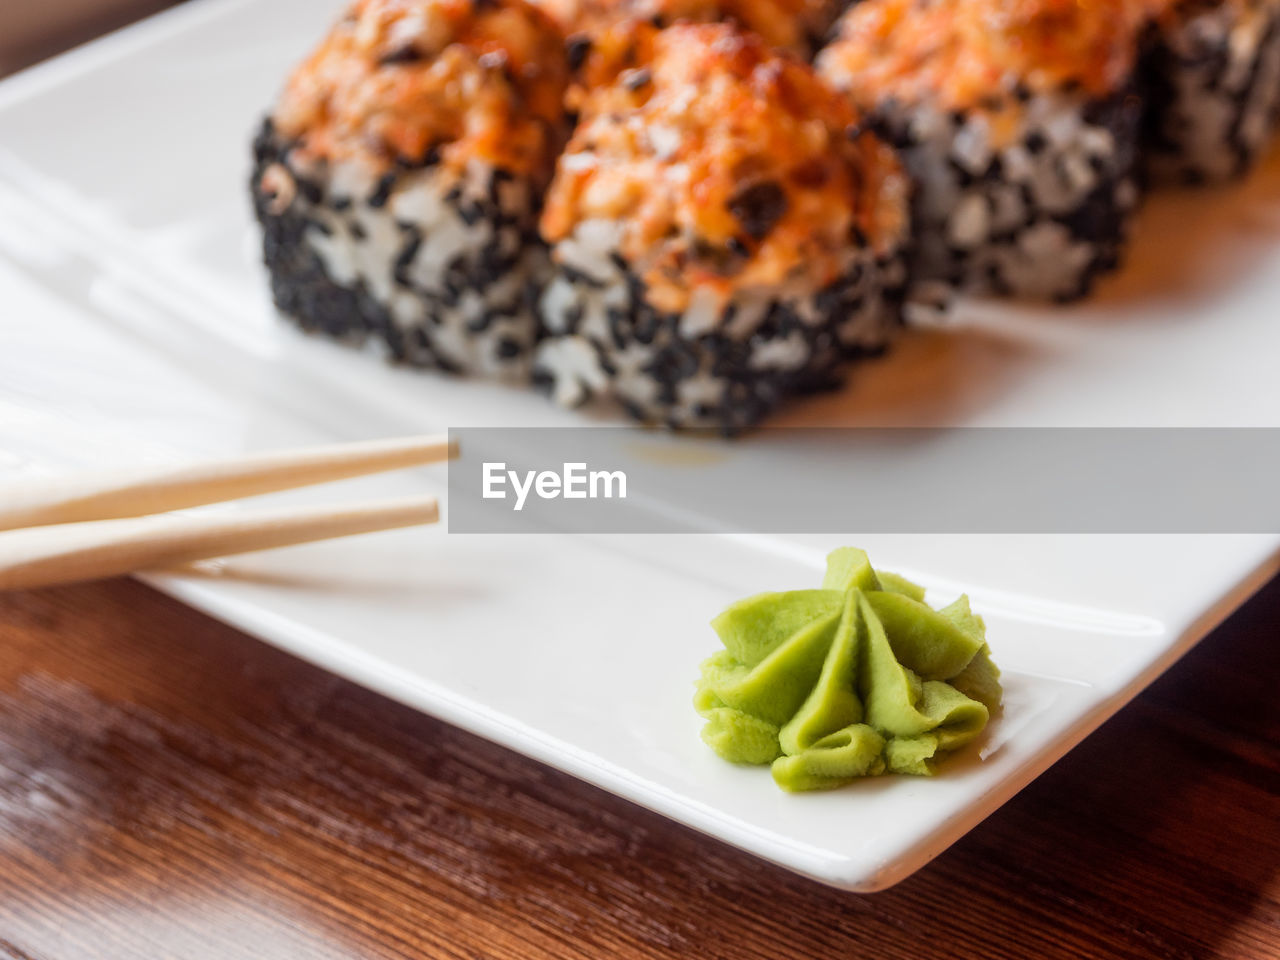 Wasabi sauce and rolls with eel, shiitake, black sesame, spicy sauce. asian cuisine - sushi.